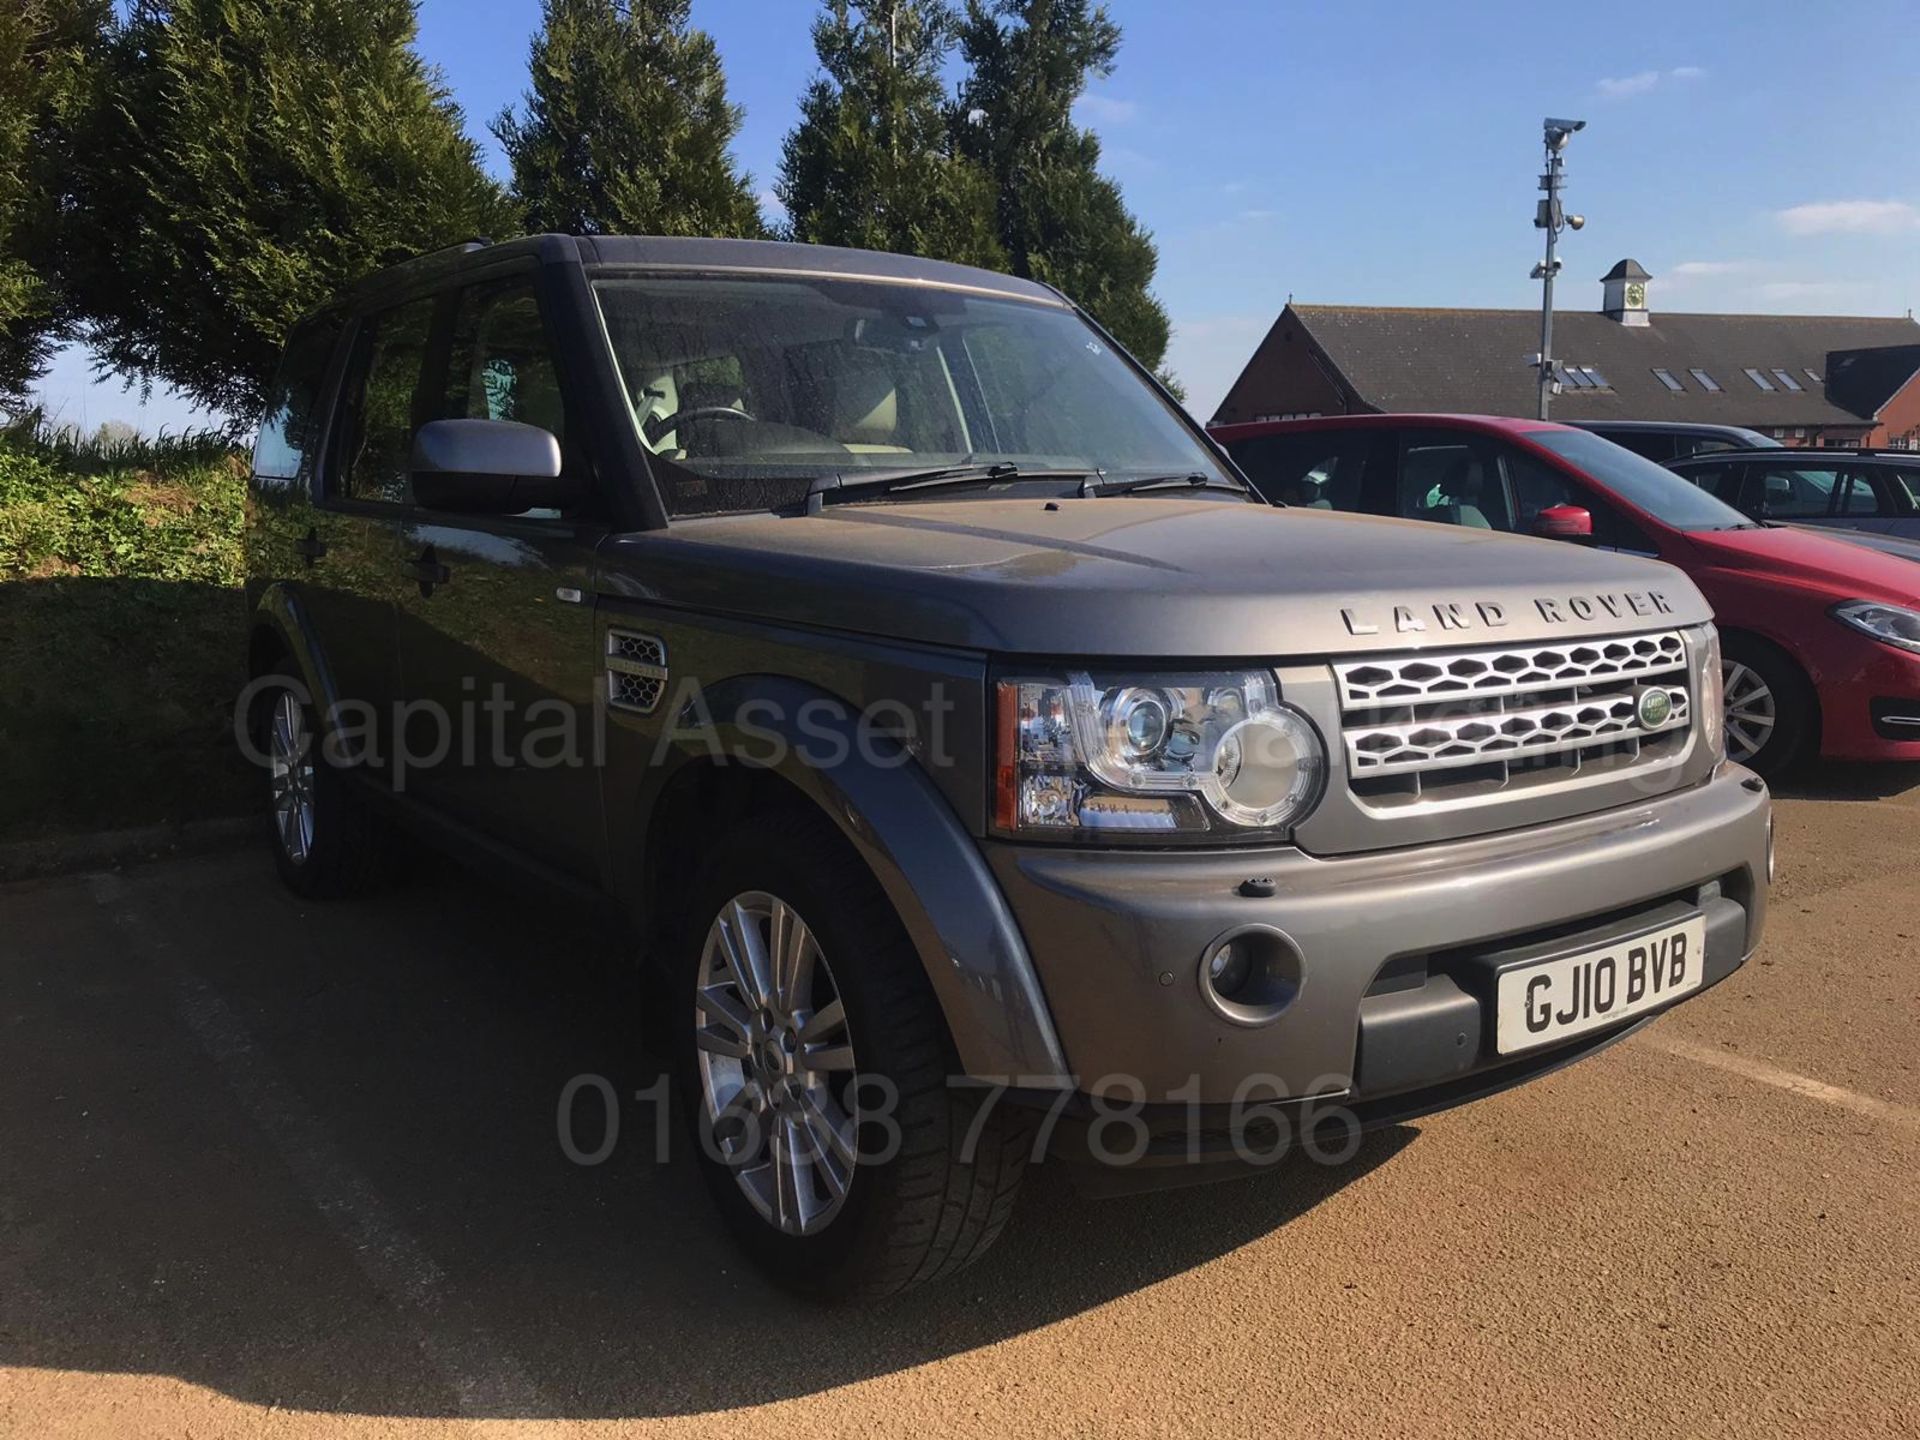 (ON SALE) LAND ROVER DISCOVERY 4 *HSE* SUV (2010) '3.0 TDV6 - 245 BHP - AUTO' *LEATHER - SAT NAV* - Image 2 of 24